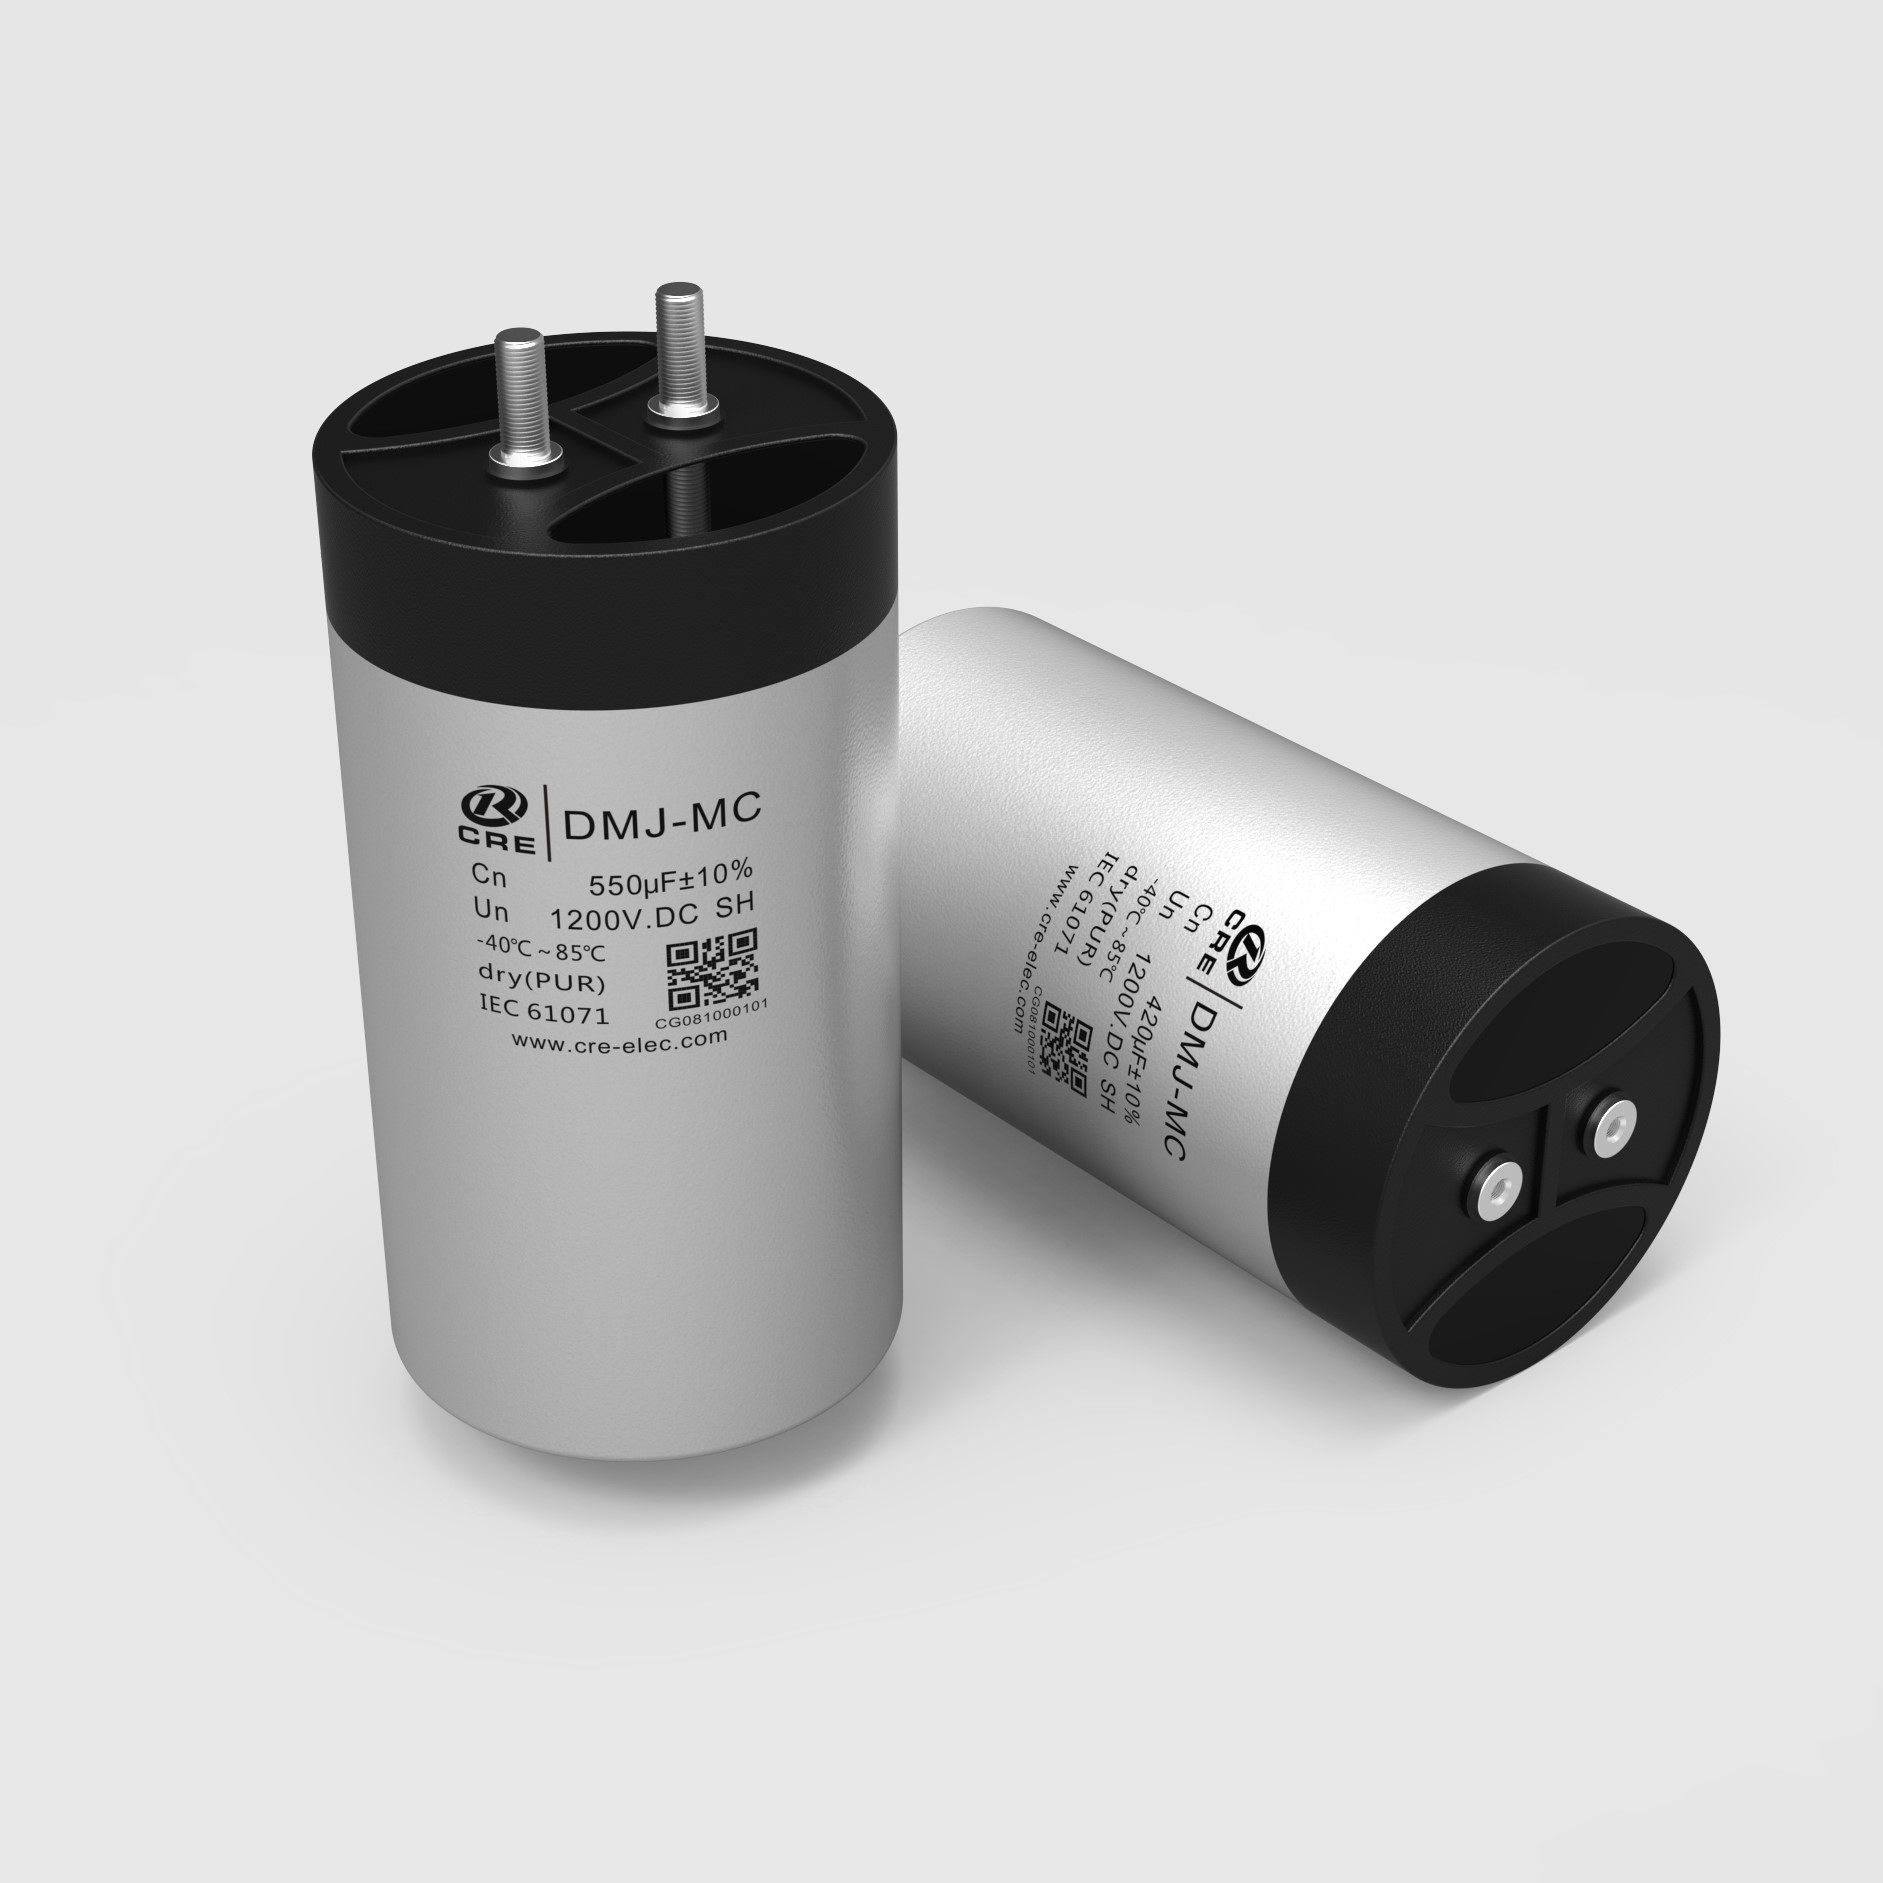 China DC link capacitor DMJ-MC factory and suppliers | CRE